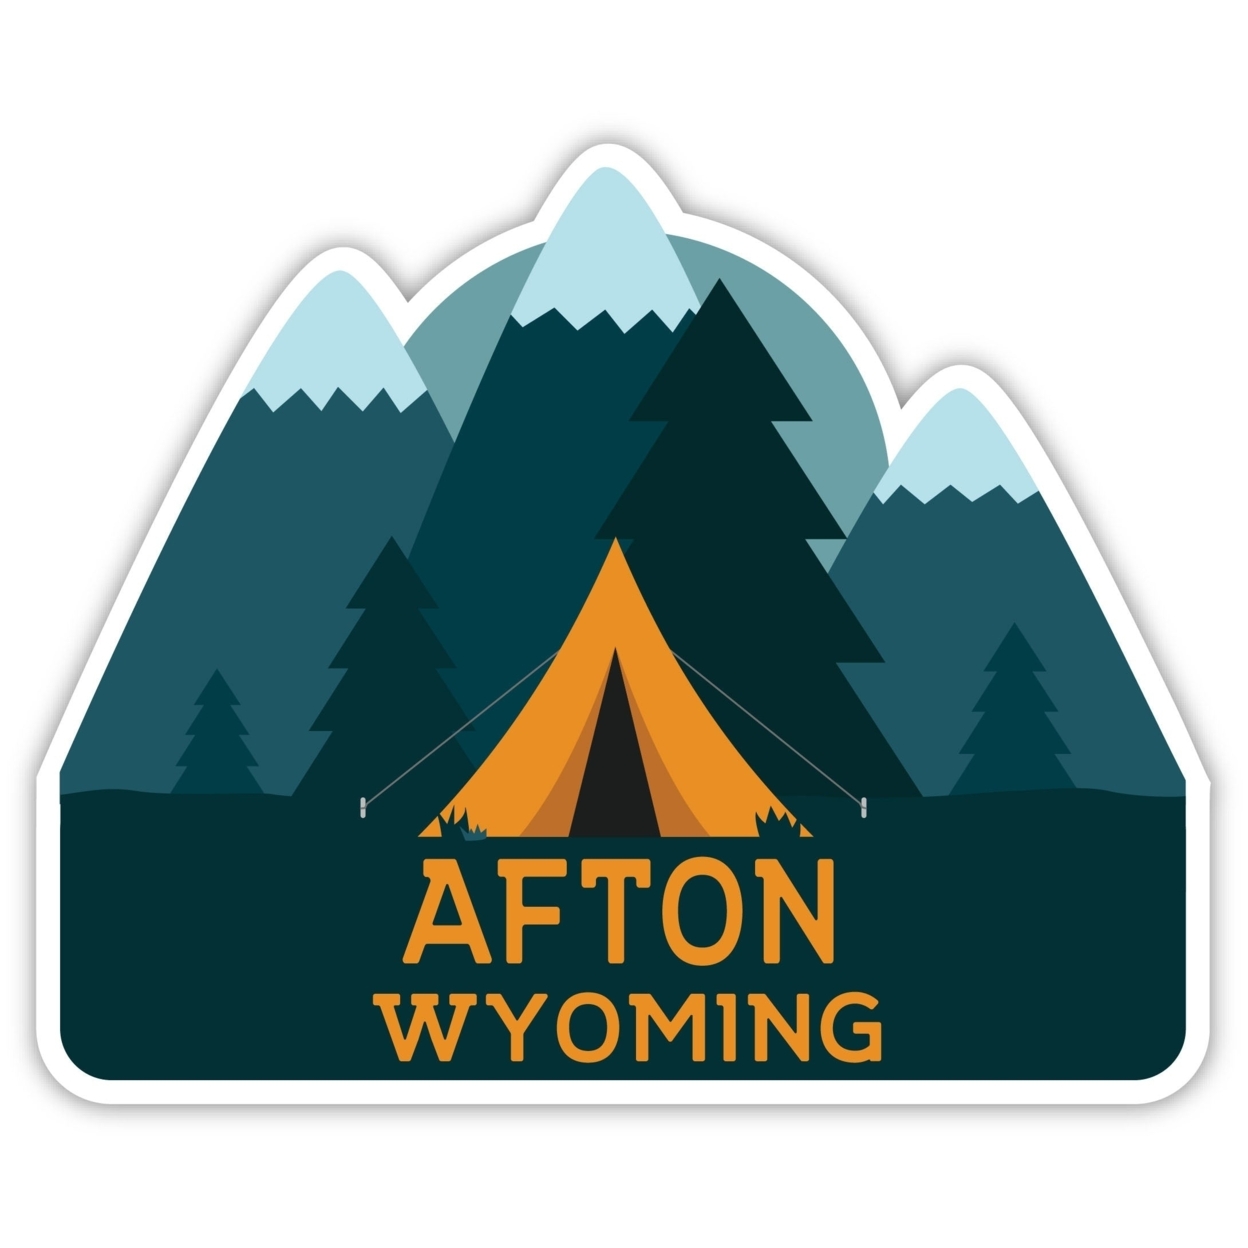 Afton Wyoming Souvenir Decorative Stickers (Choose Theme And Size) - Single Unit, 10-Inch, Tent